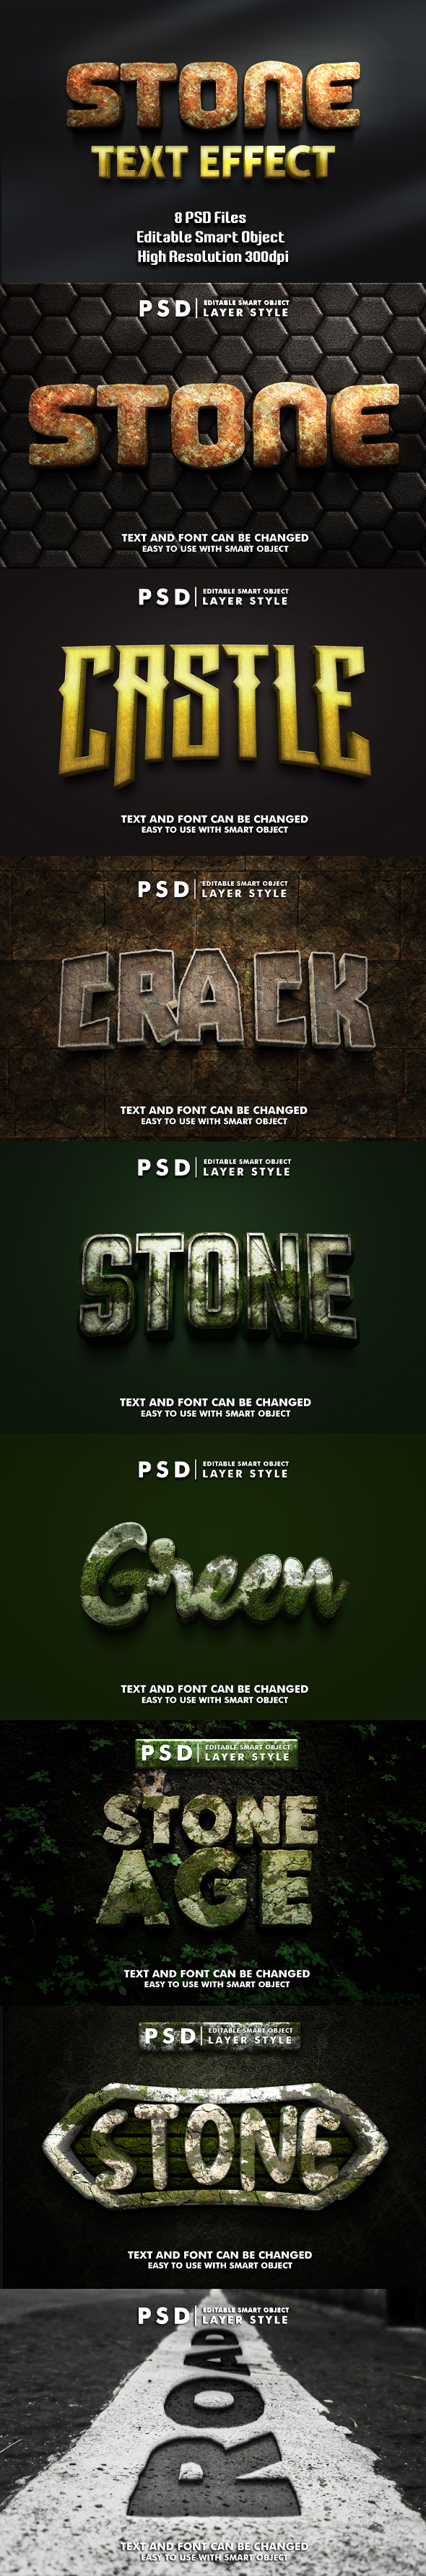 [DOWNLOAD]The Best of Stone Psd Text Effect